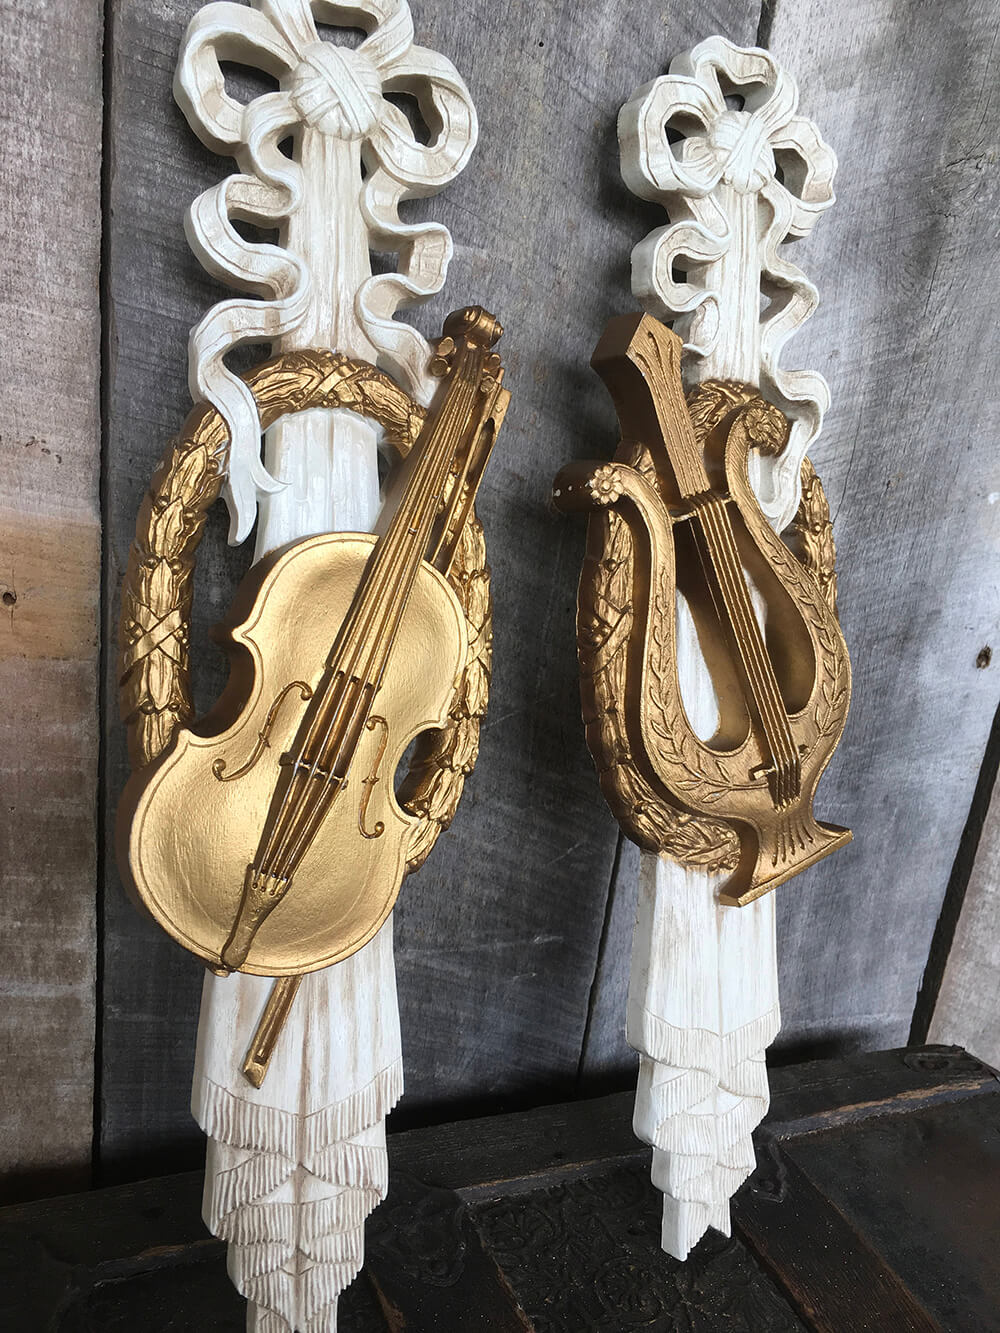 Wooden Wall hangings with Gold Instruments